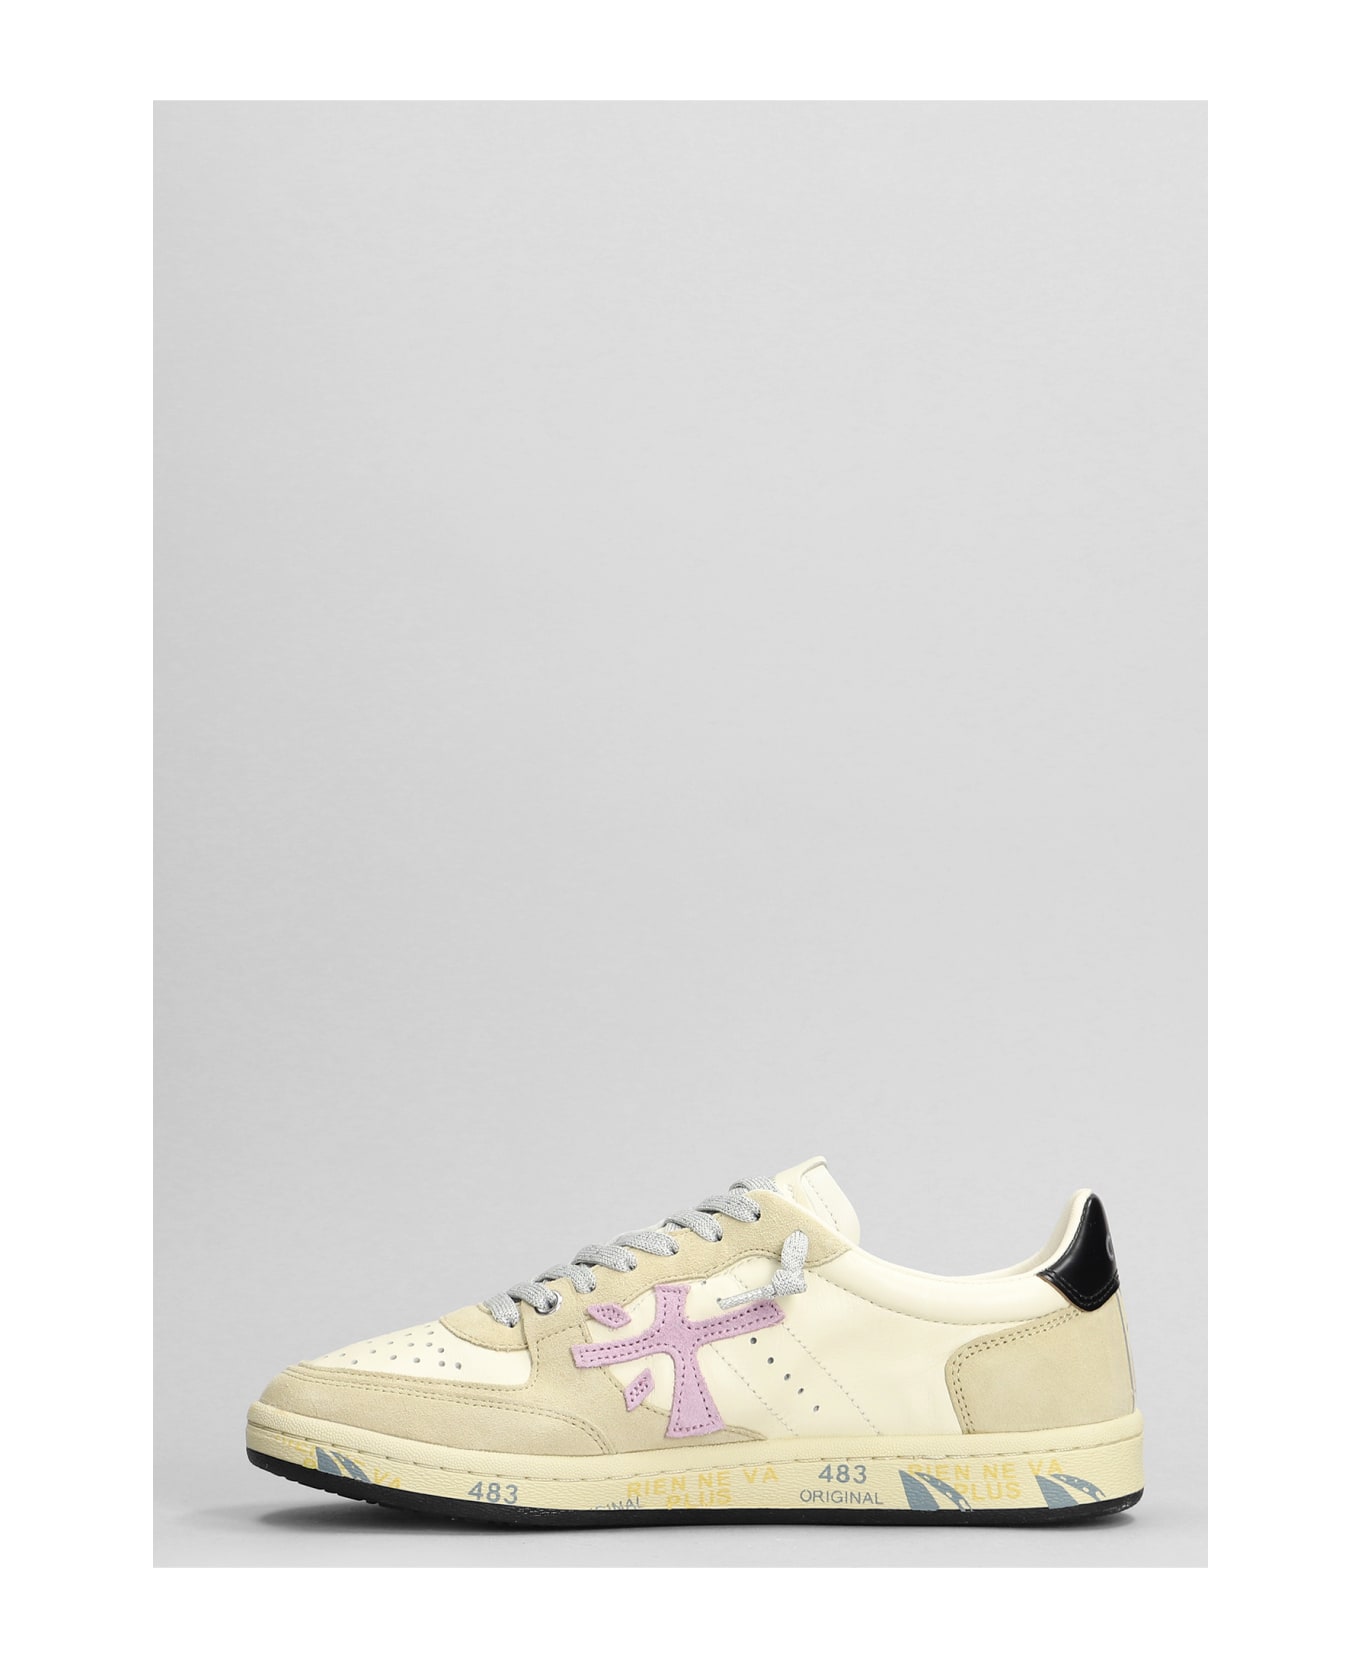 Premiata Bskt Clay Sneakers In Beige Suede And Leather